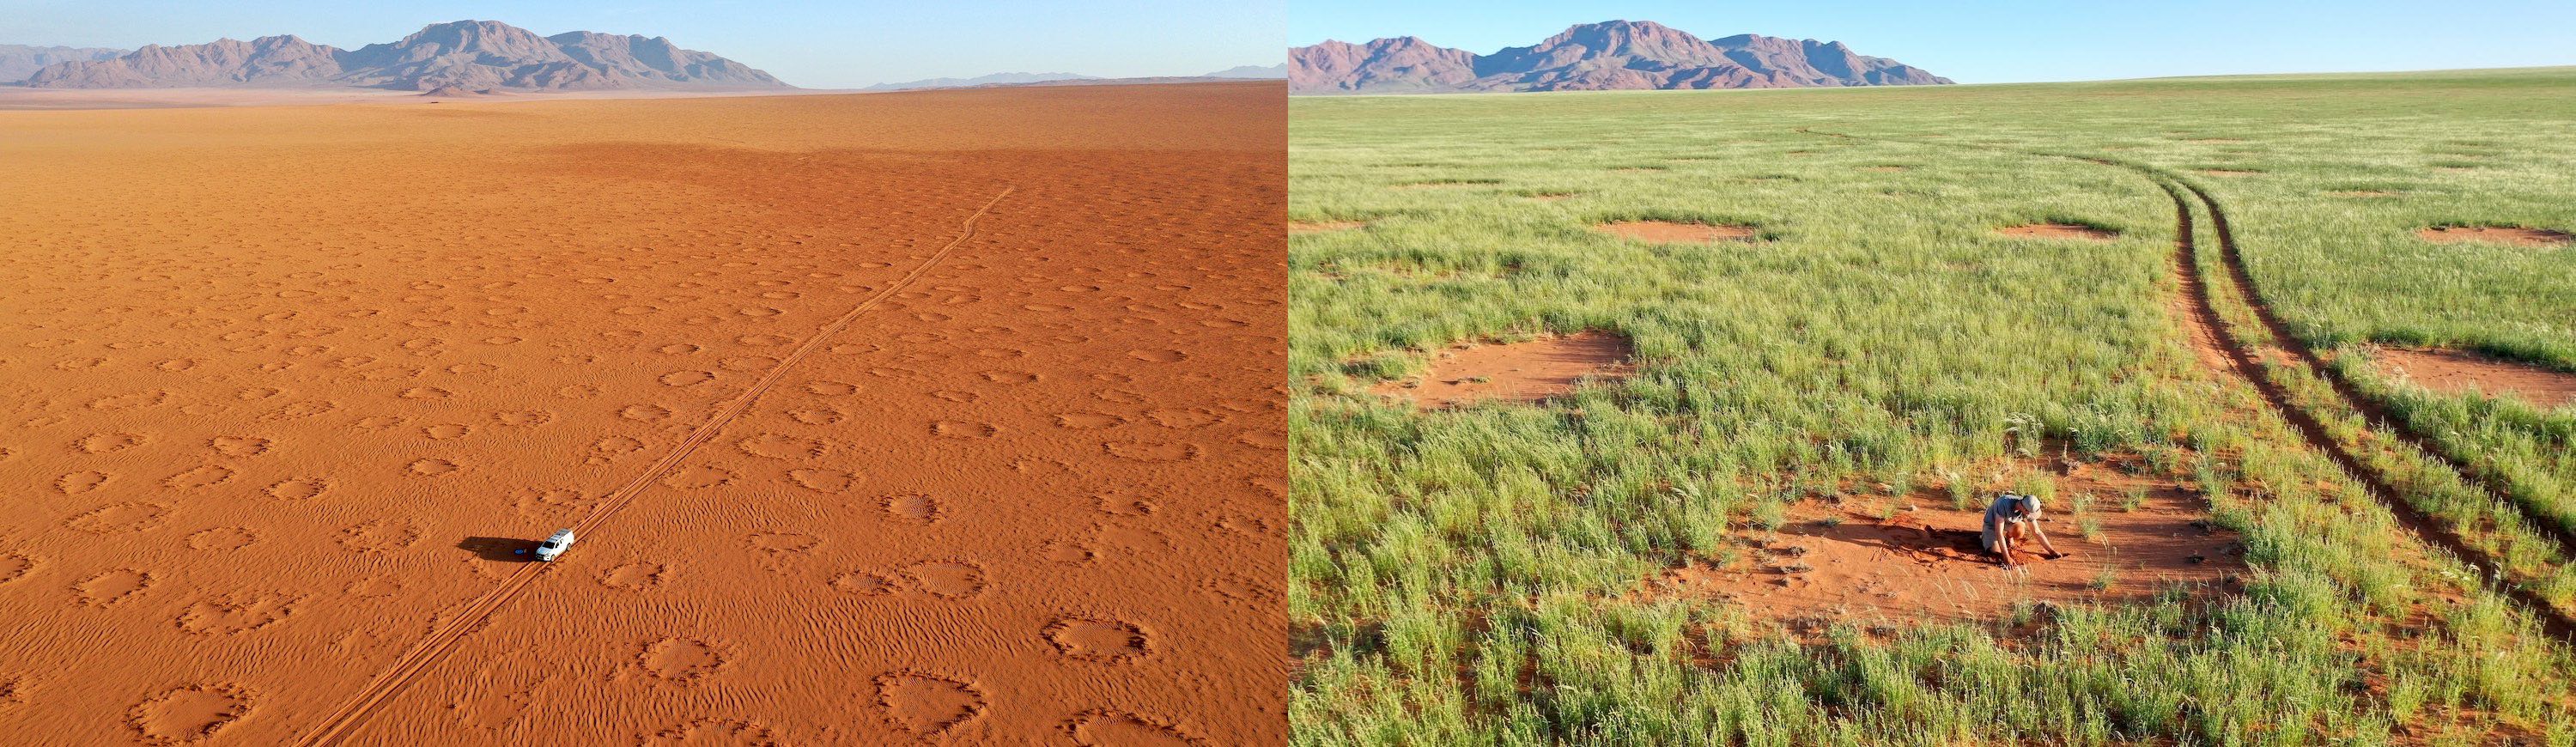 Two images of the same area, one shows fairy circles in the red sand, the other amongst green grasses.